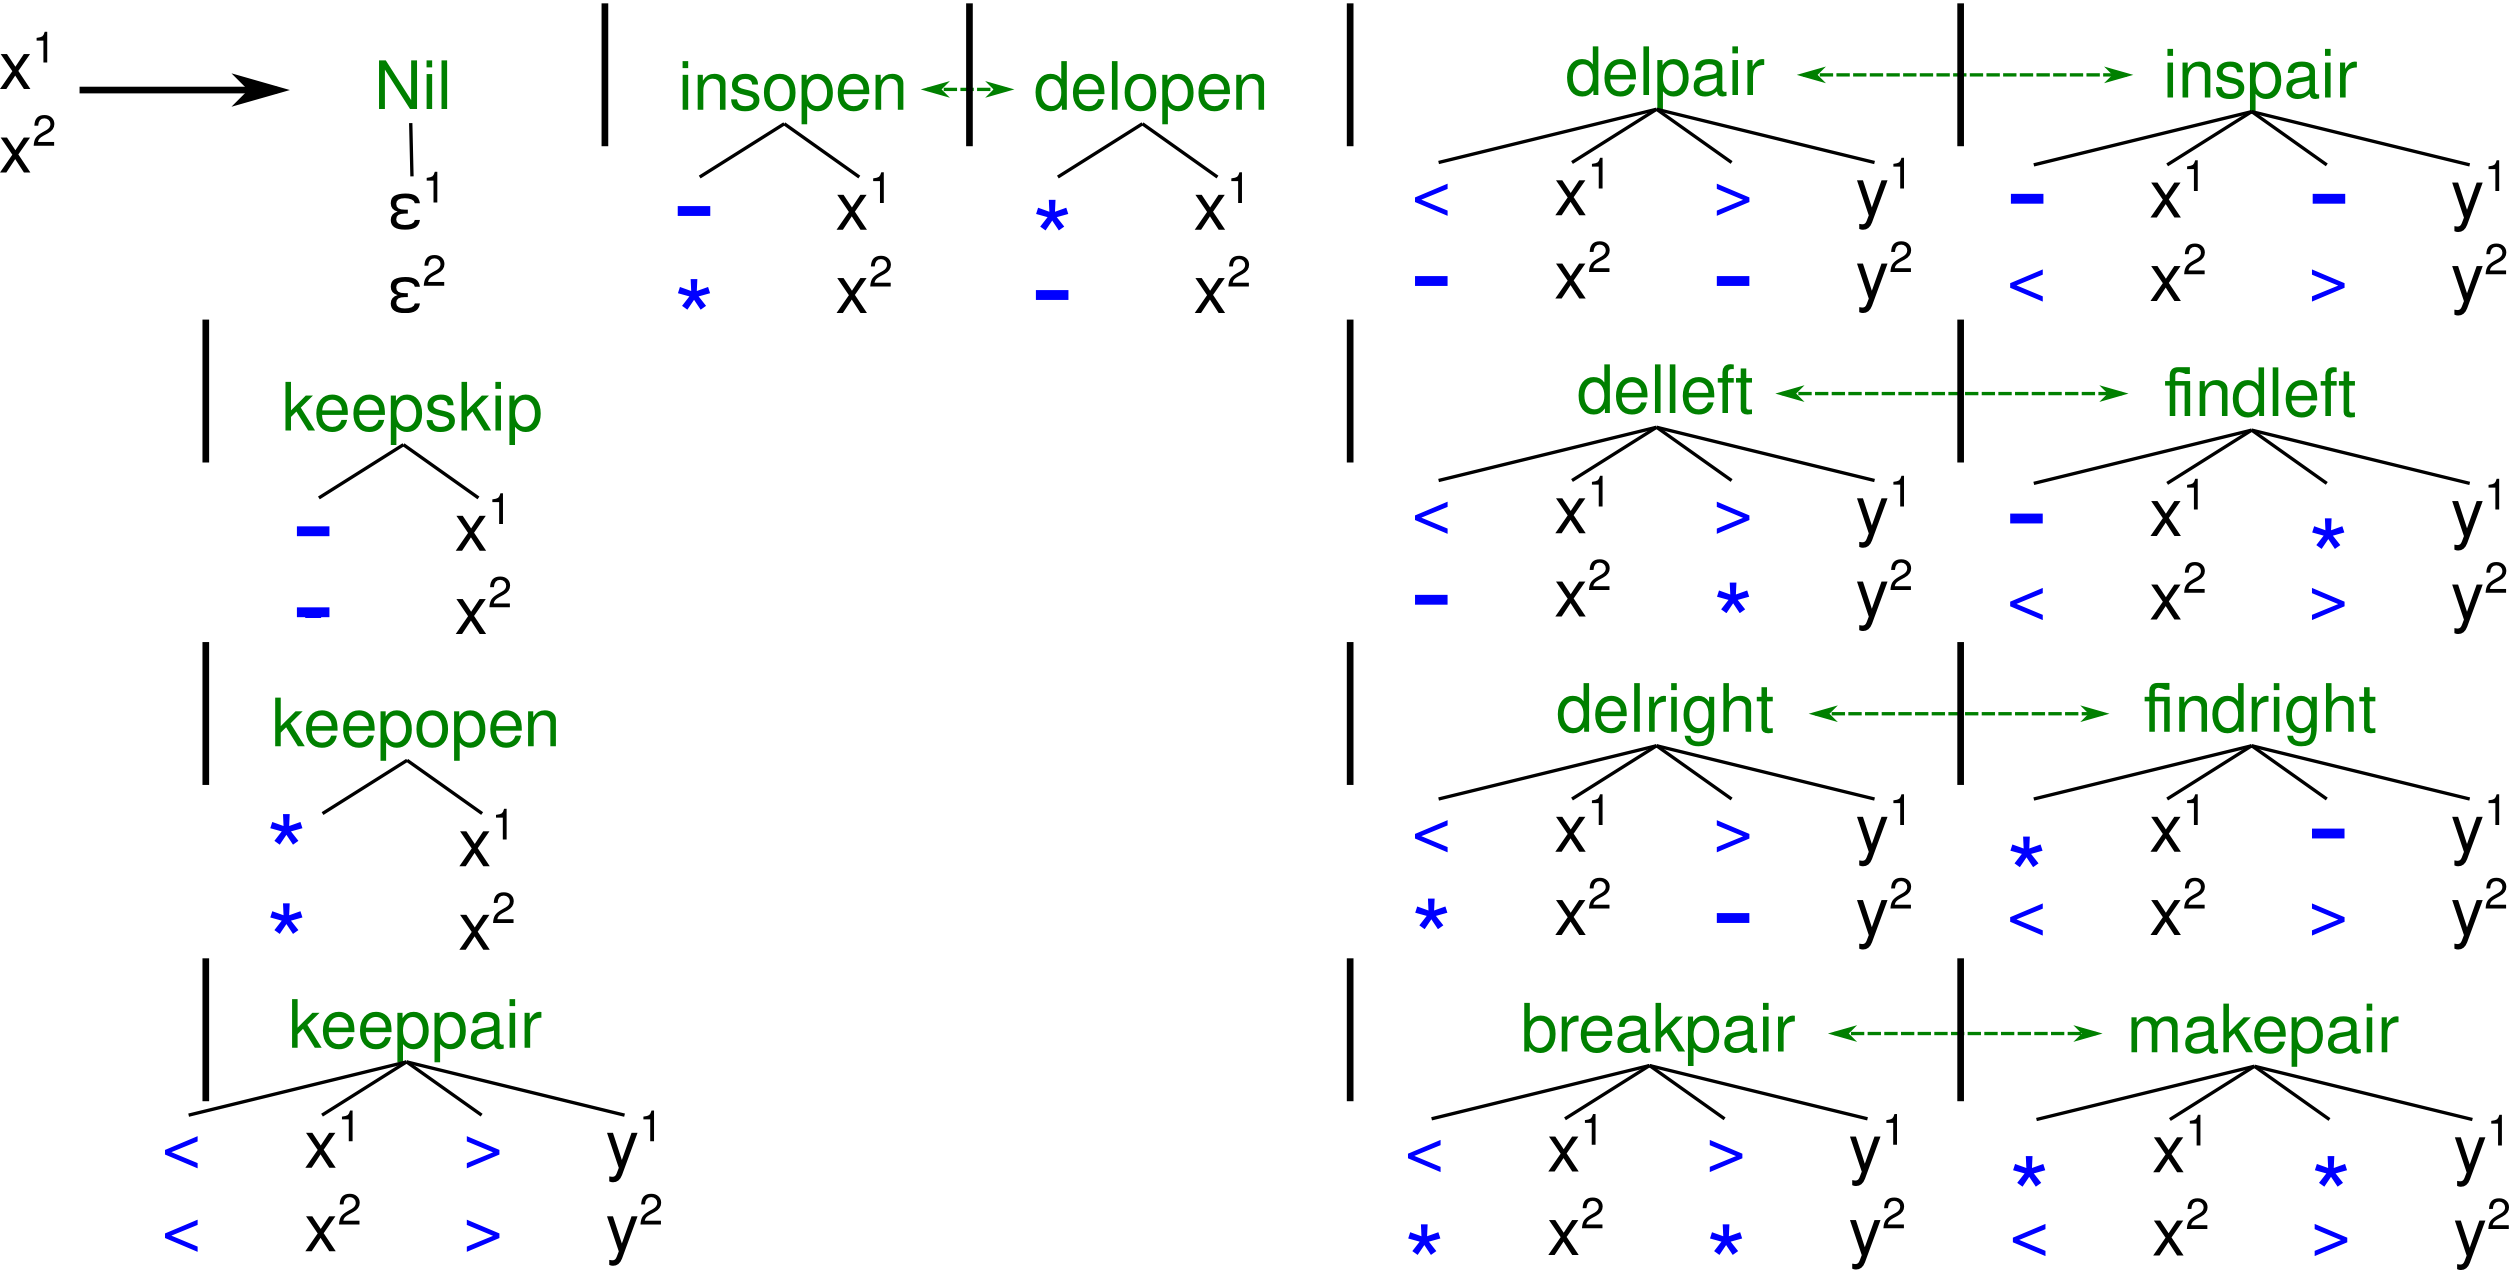 grammar to align two consensus structures